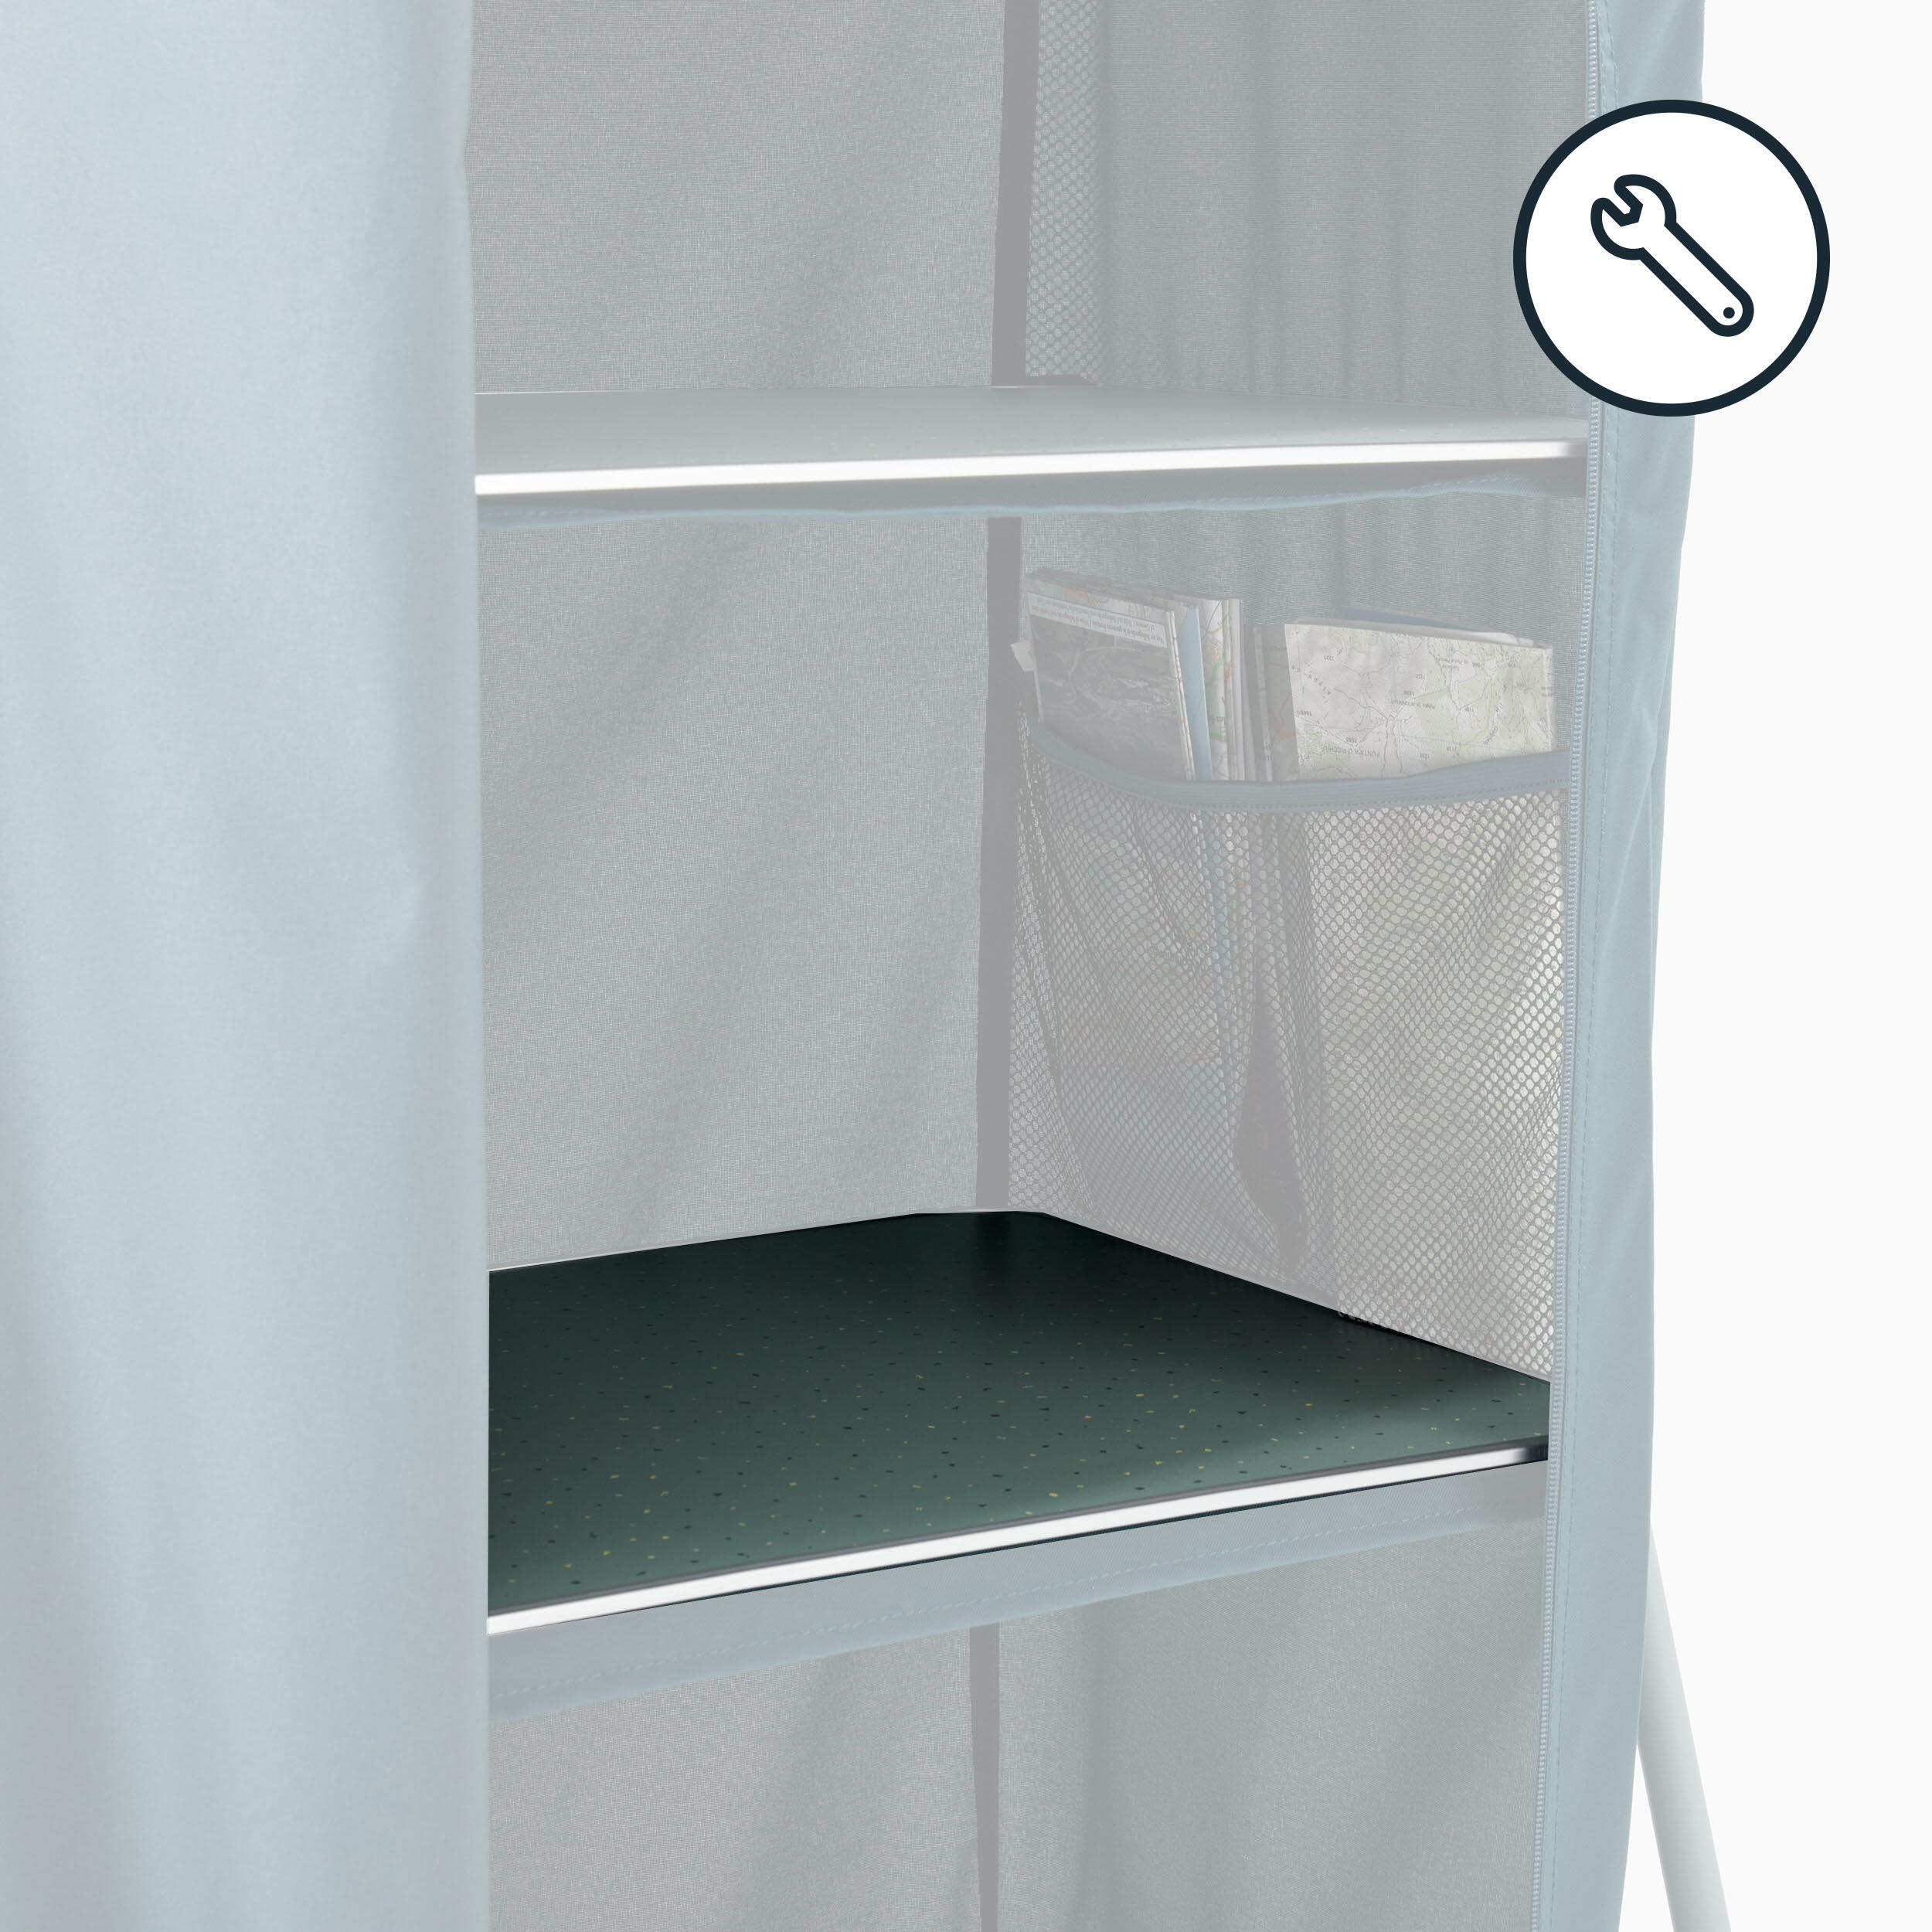 QUECHUA REPLACEMENT SHELF - SPARE PART FOR THE BASIC & XL FOLDING WARDROBE